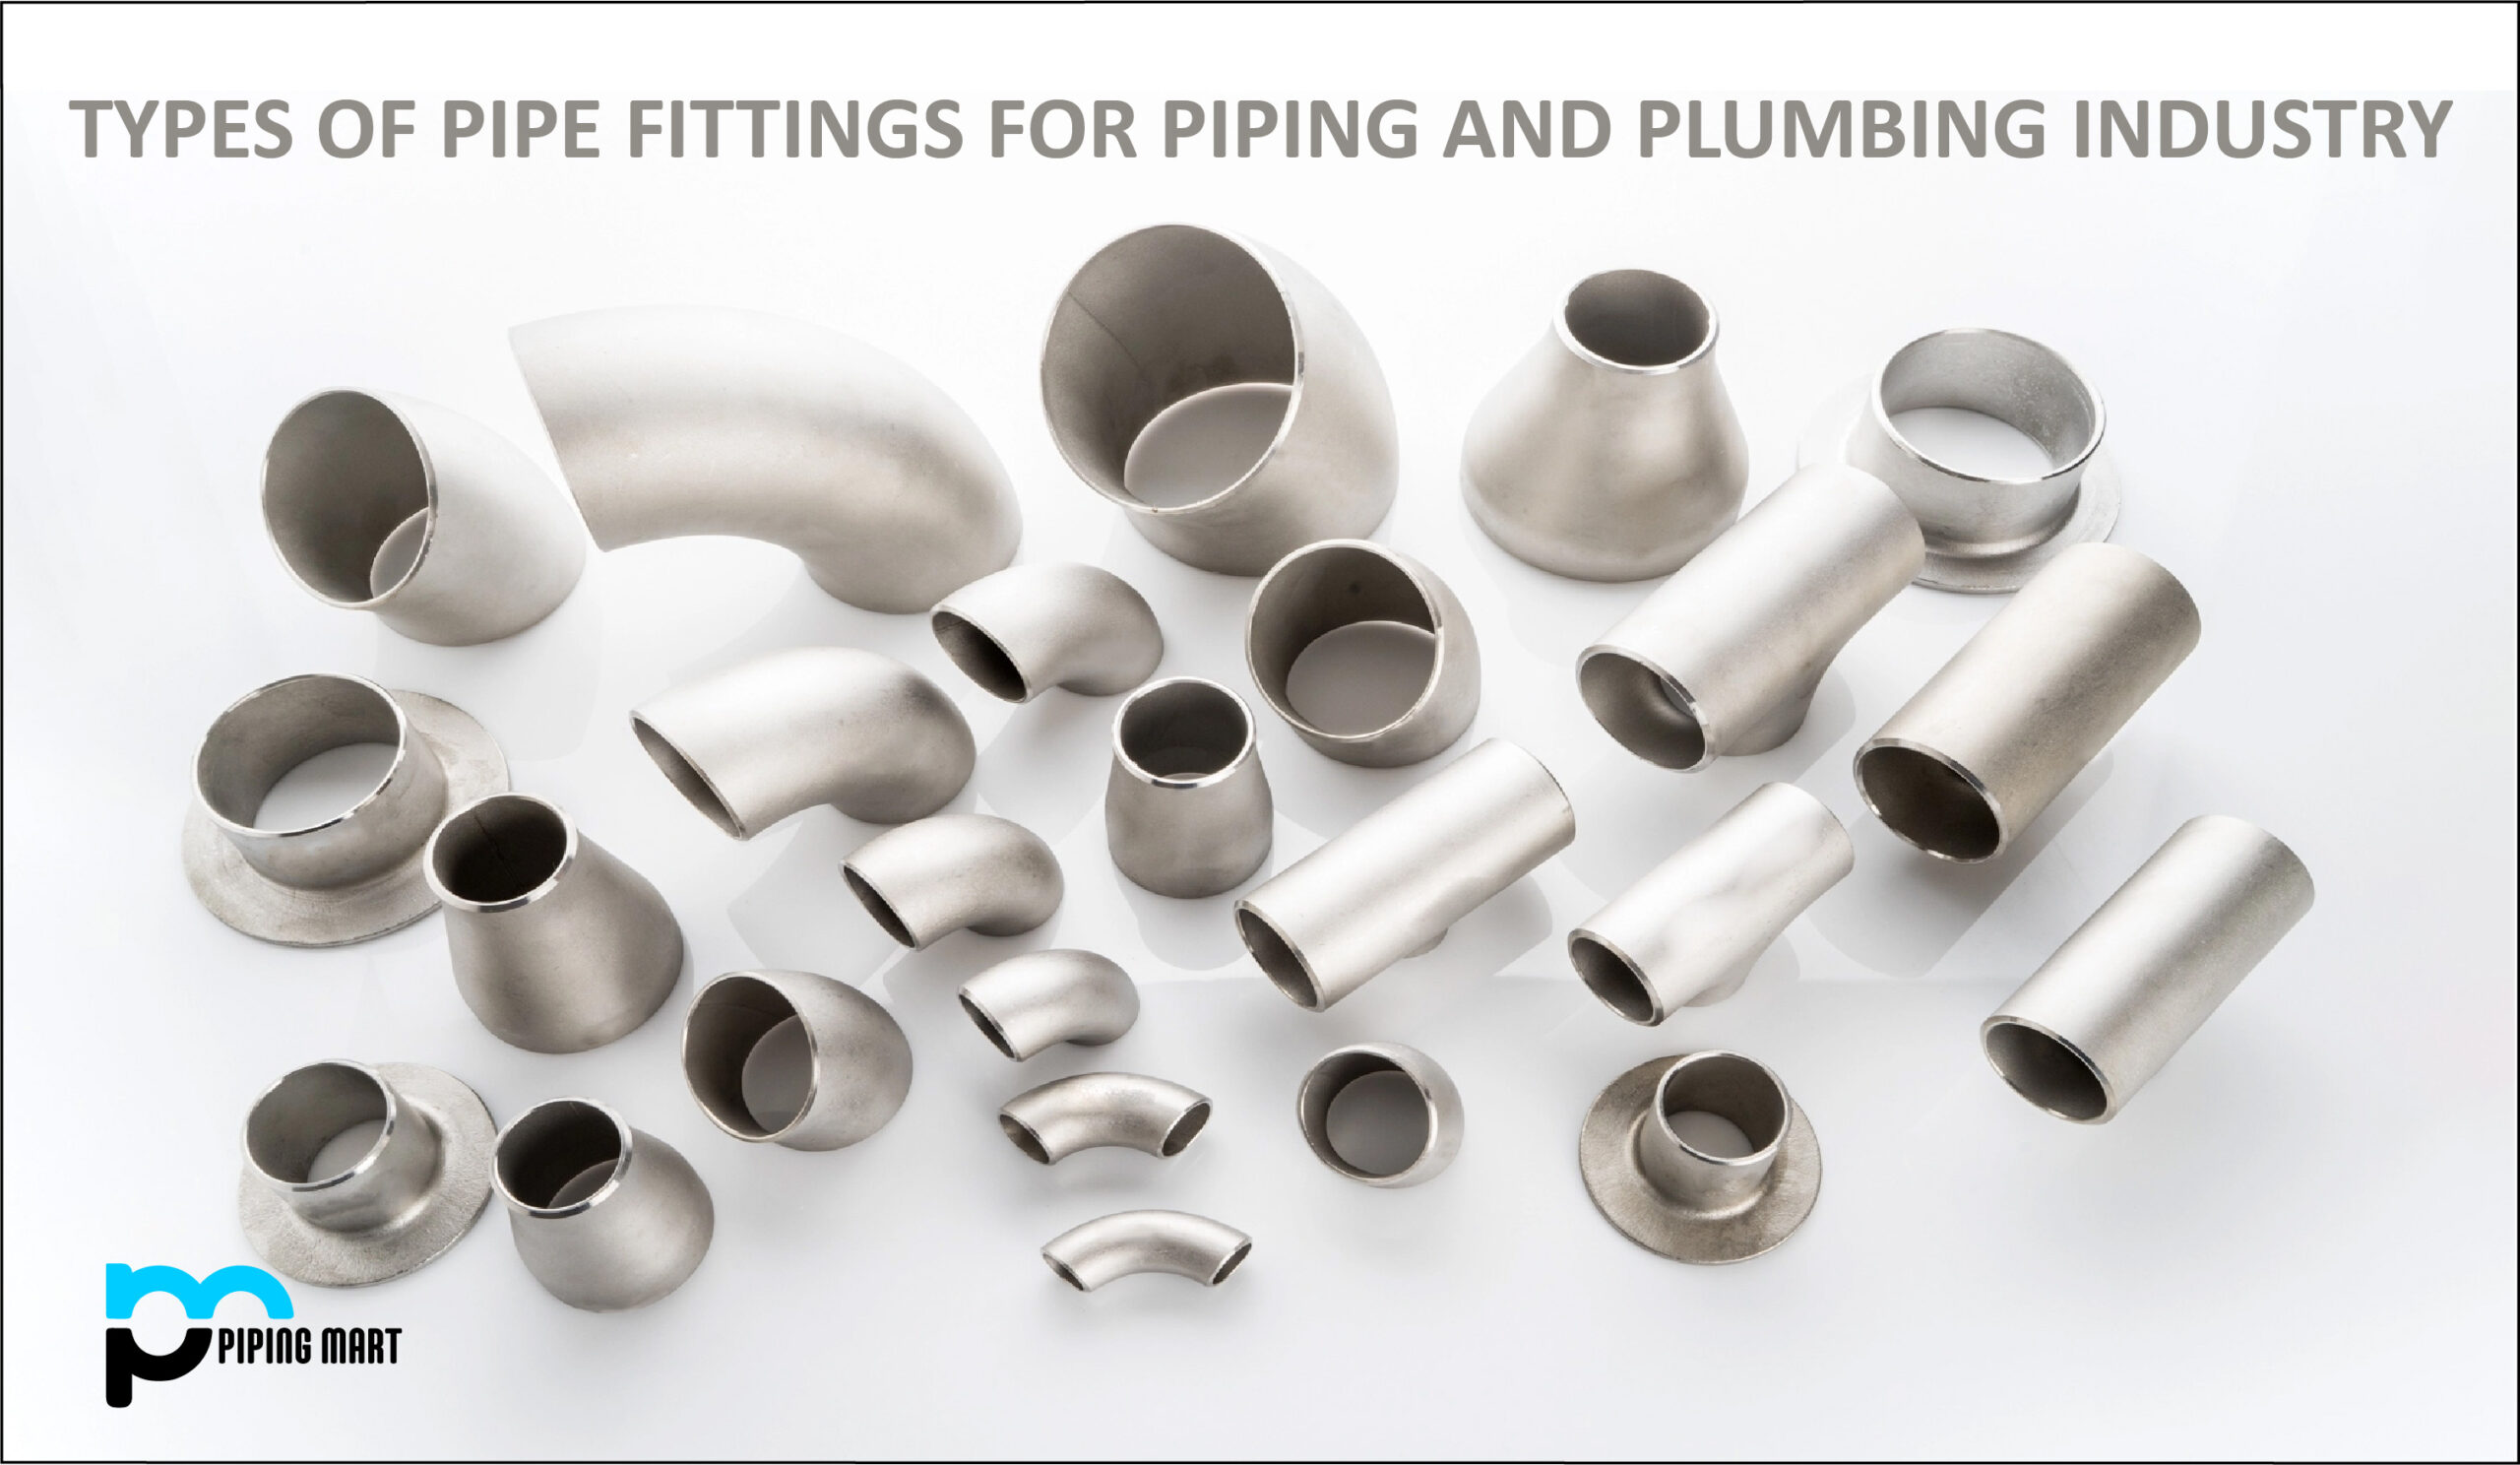 Types of Pipe Fittings for Piping and Plumbing Industry - ThePipingMart Blog